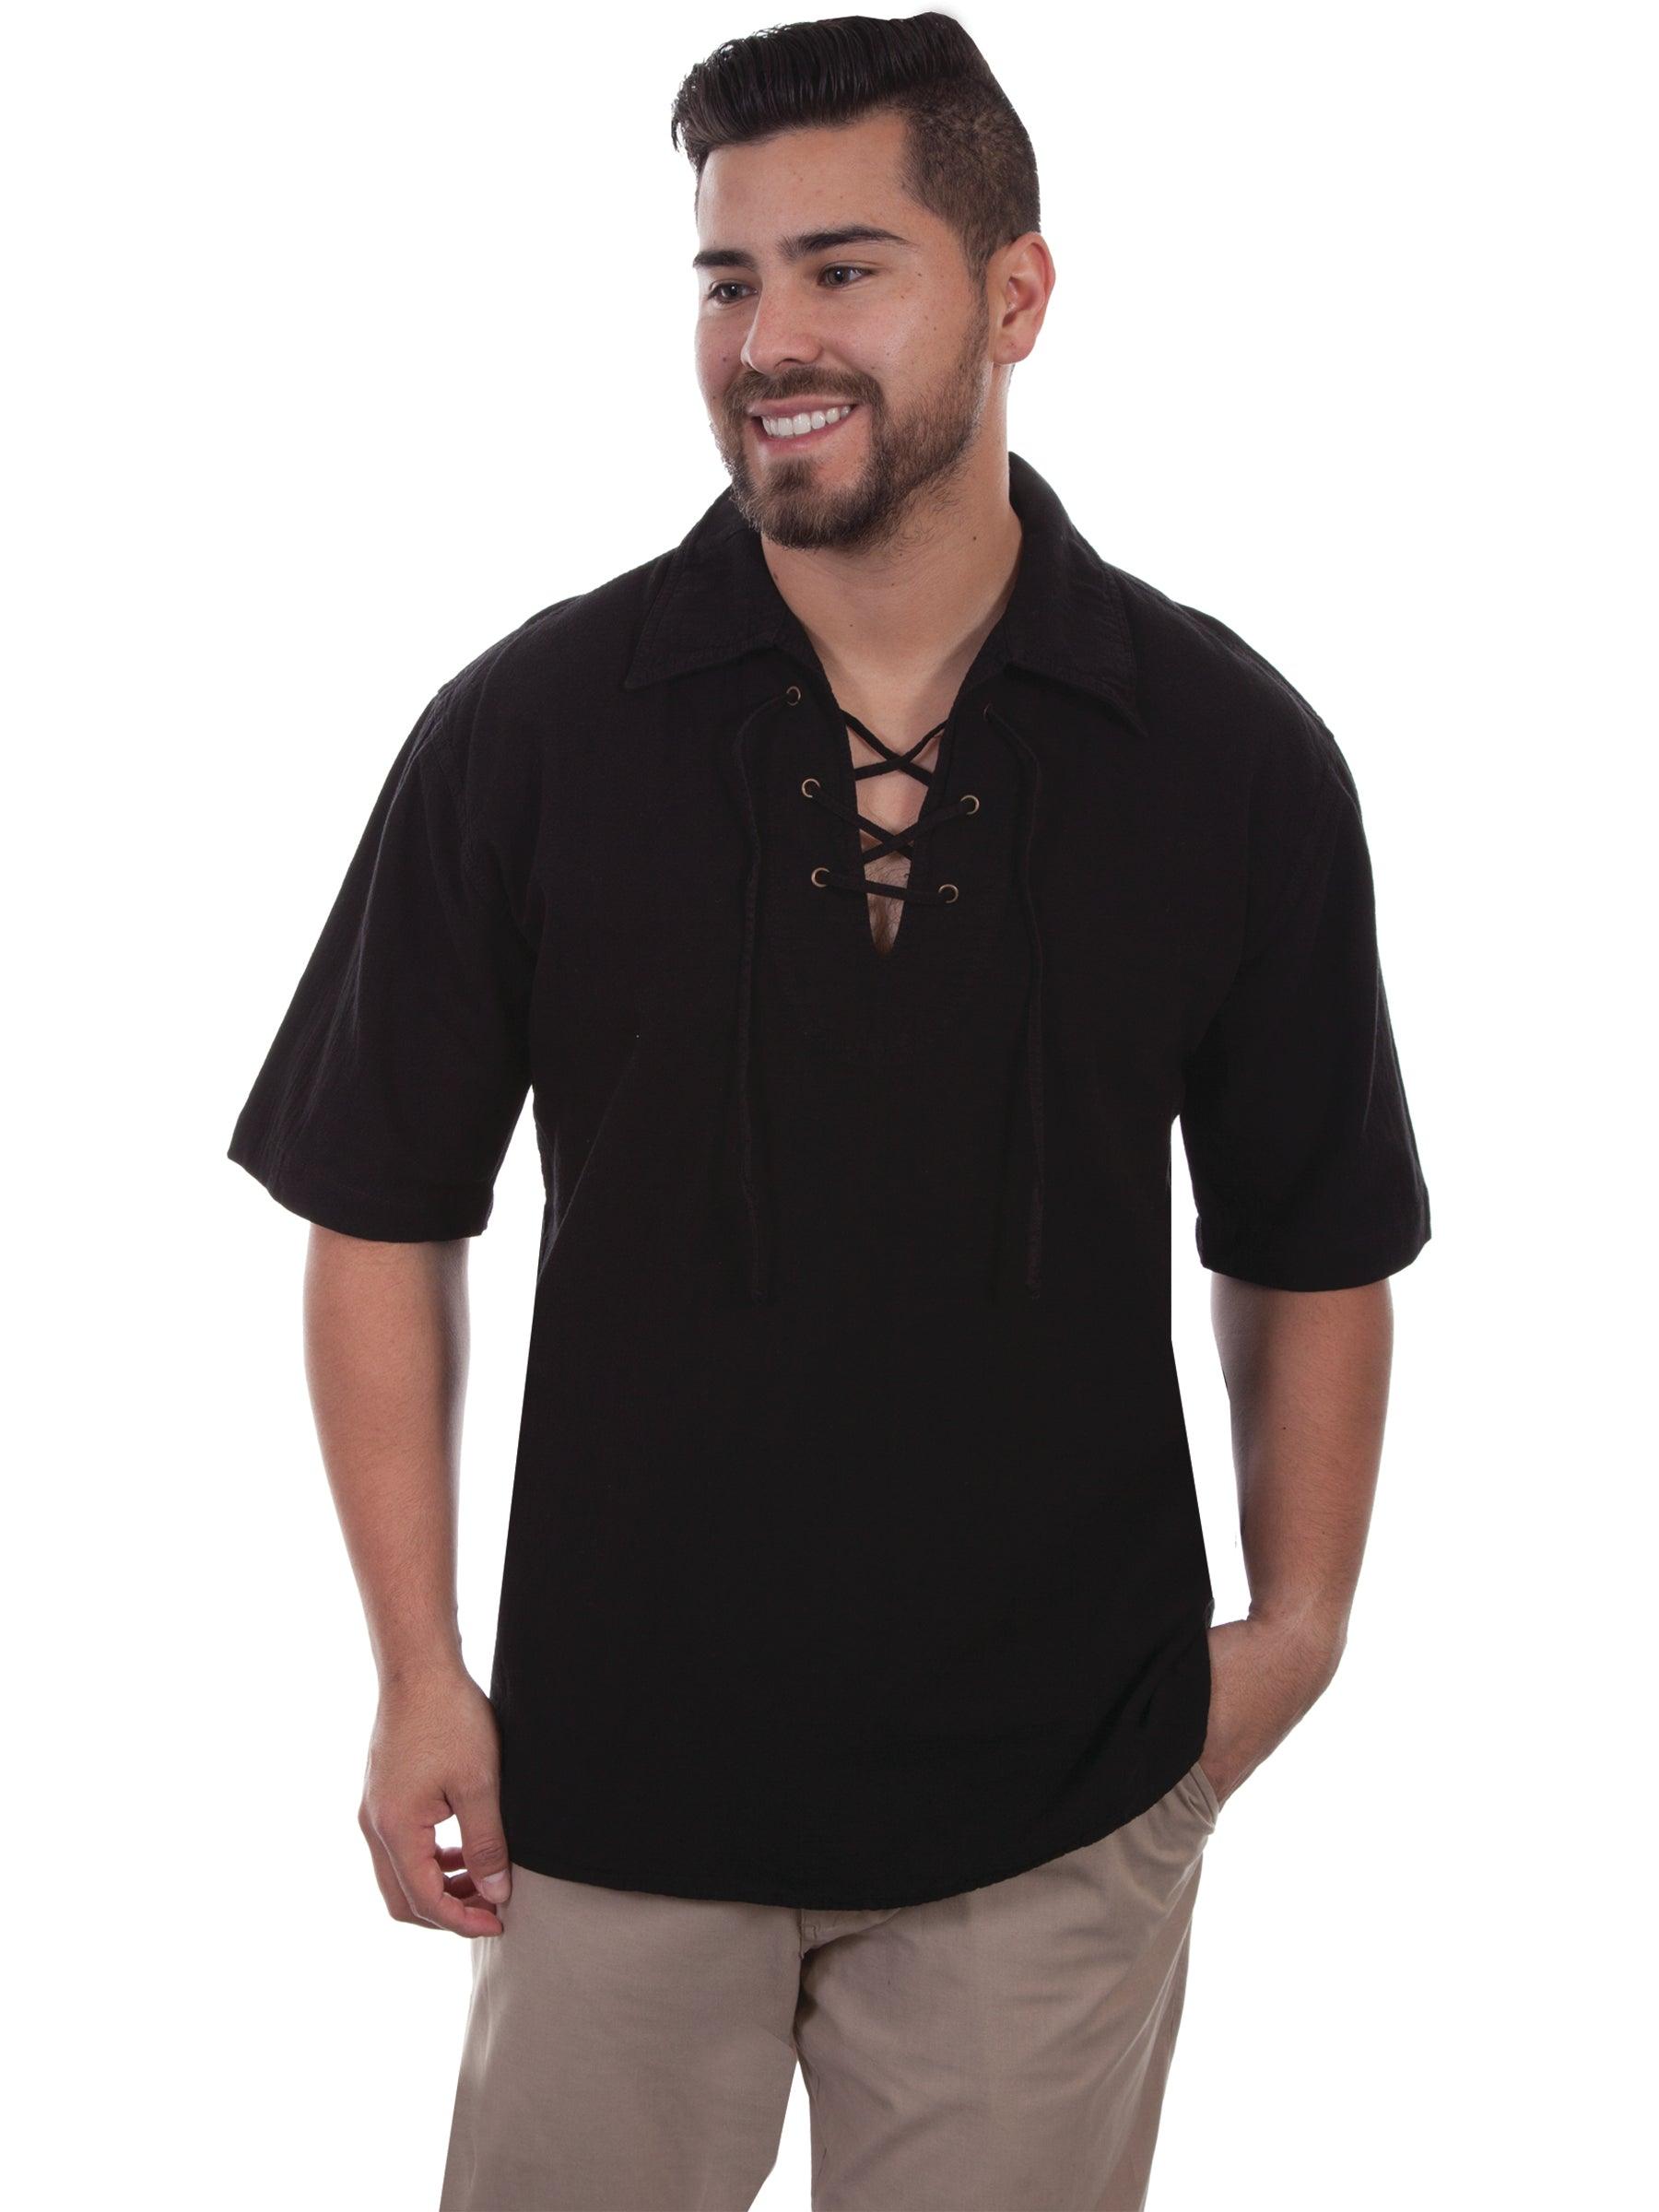 Scully BLACK S/S MEN'S LACE UP FRONT SHIRT - Flyclothing LLC